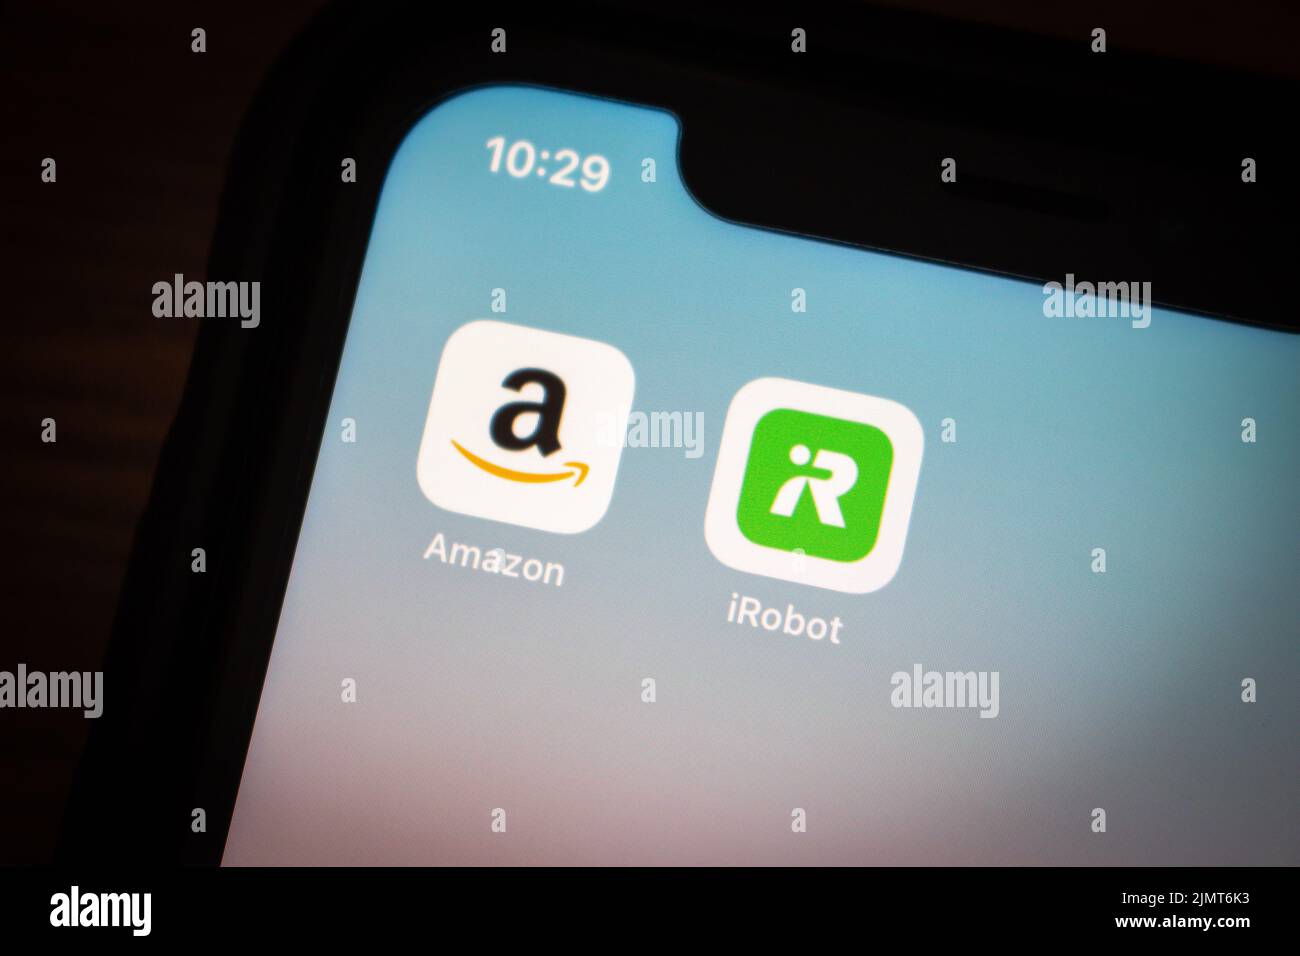 Vancouver, CANADA - Aug 6 2022 : Amazon and iRobot icons on an iPhone in a dark mood. In Aug 2022, they sign an agreement for Amazon to buy iRobot Stock Photo